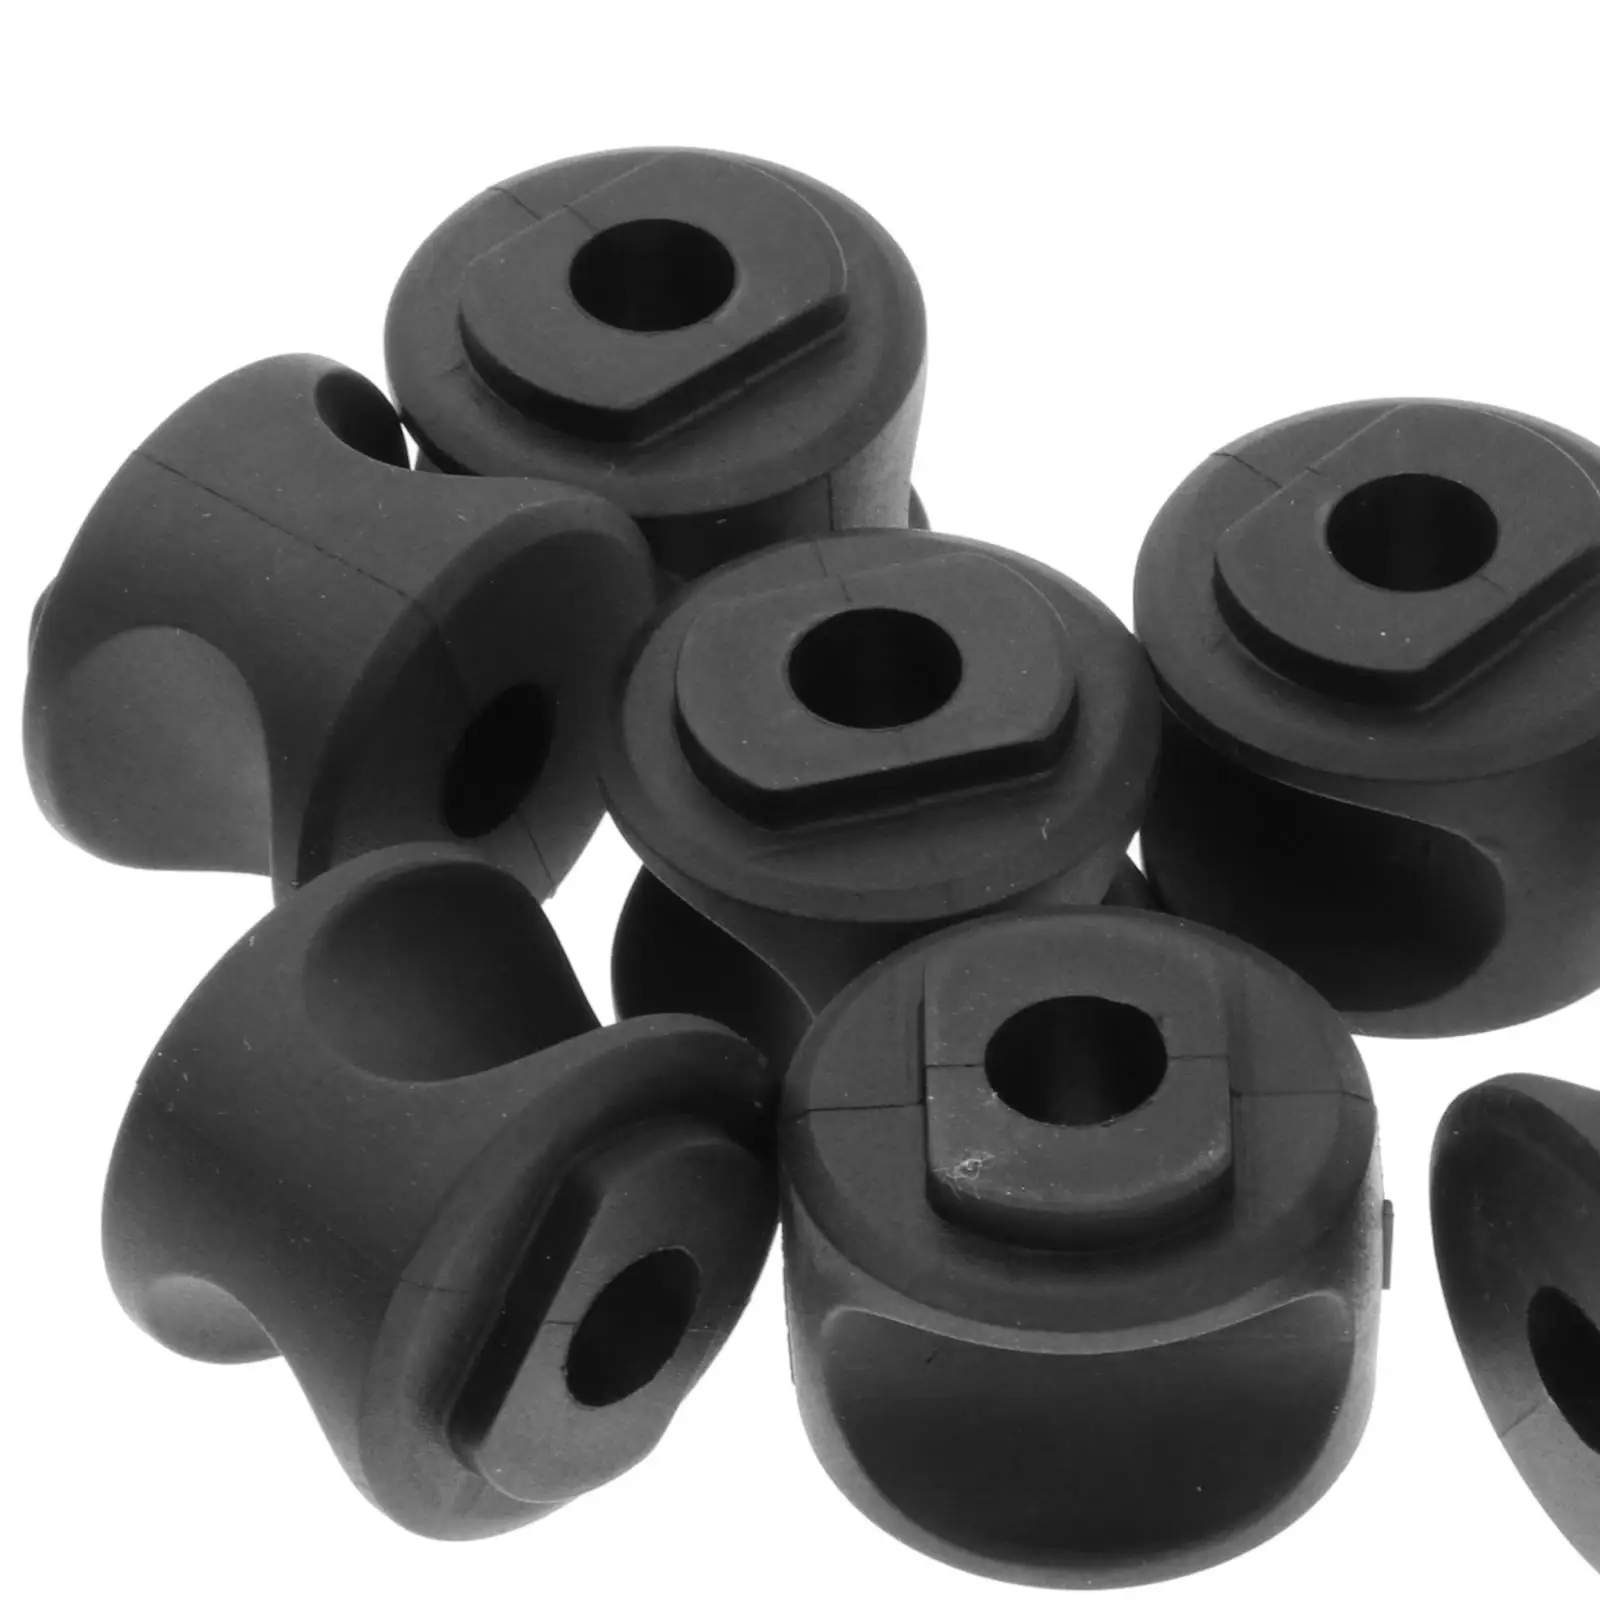  31 Inch / 31mm Rear Stabilizer Support Bushing Easy to Replace for ATV